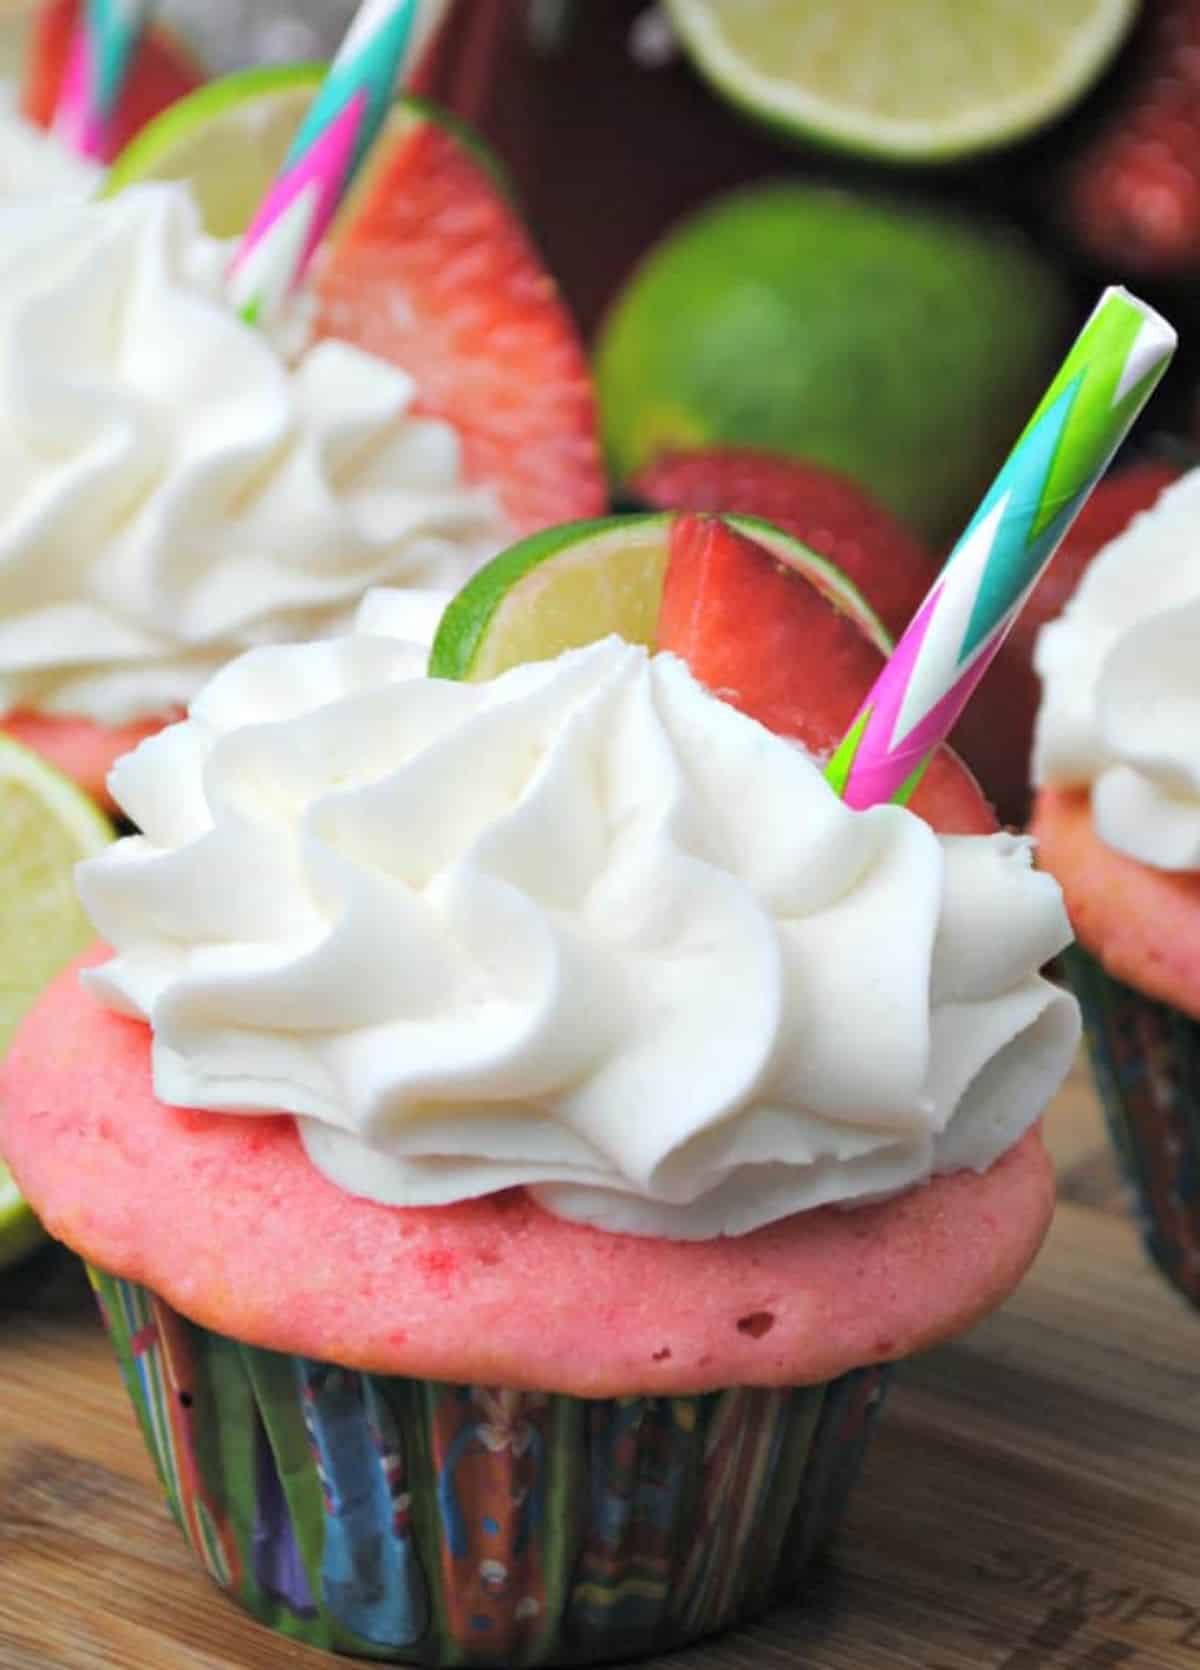 Strawberry Margarita Cupcakes topped with lime and strawberry and colorful straw on a wooden board.